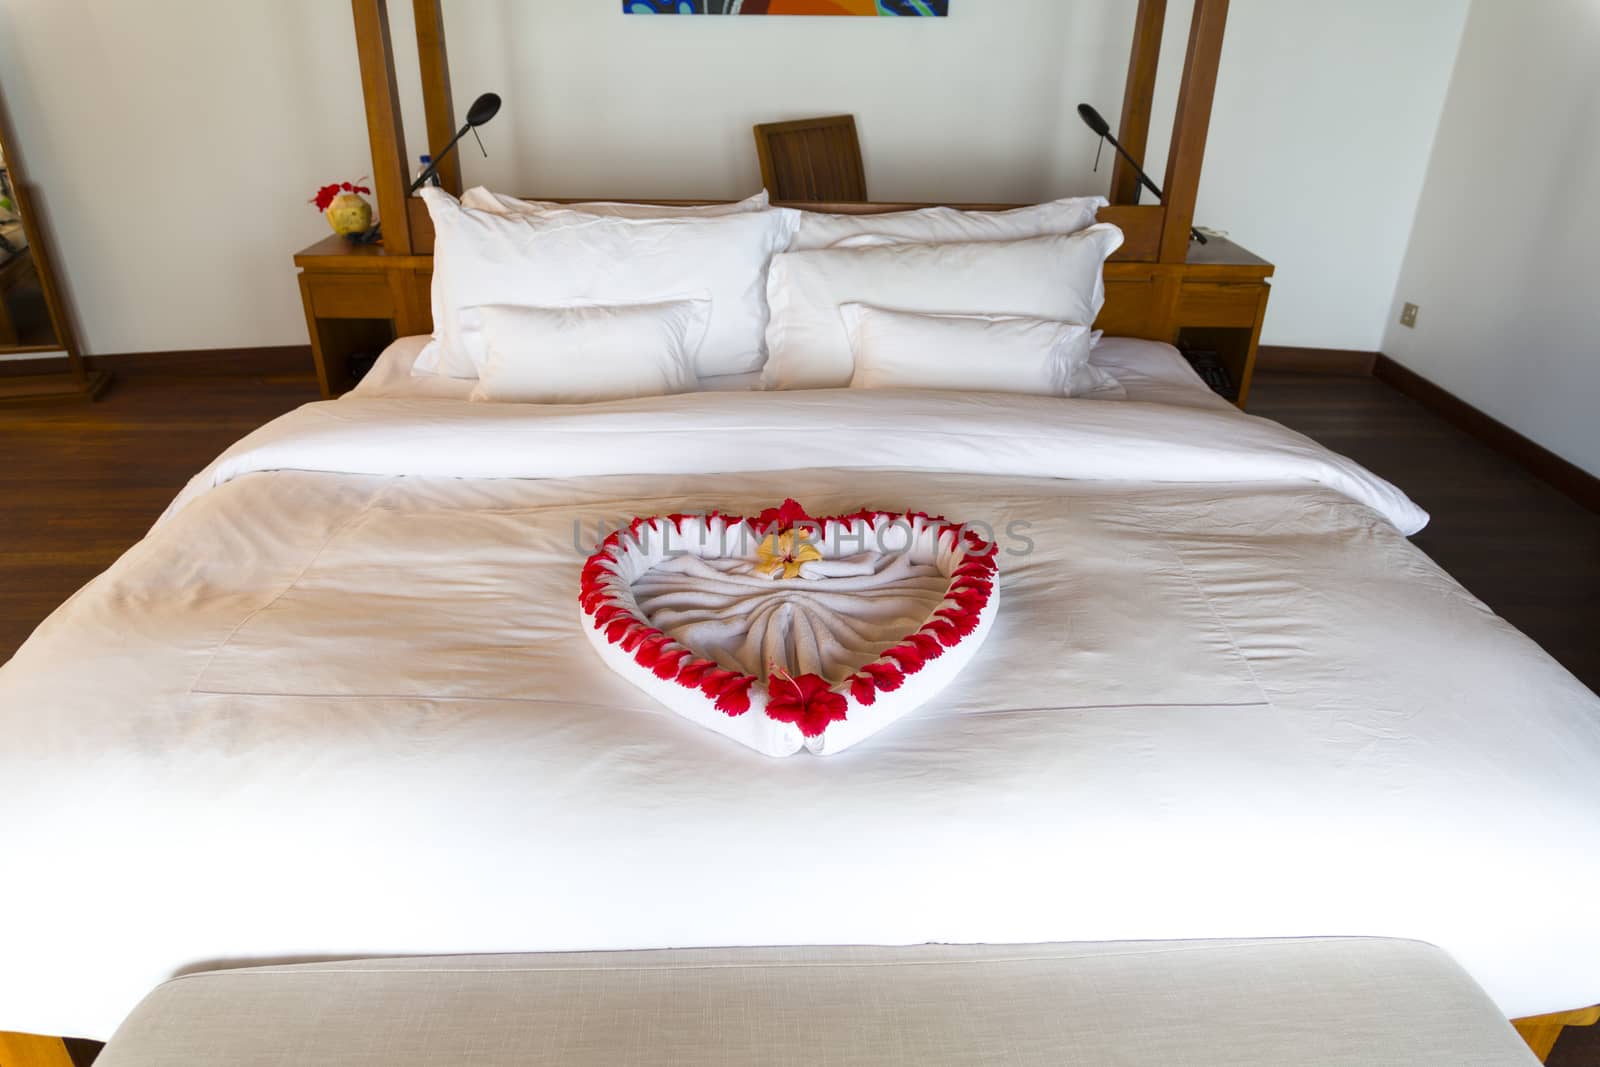 Bed with a Heart made with Towels on Top by Nemida